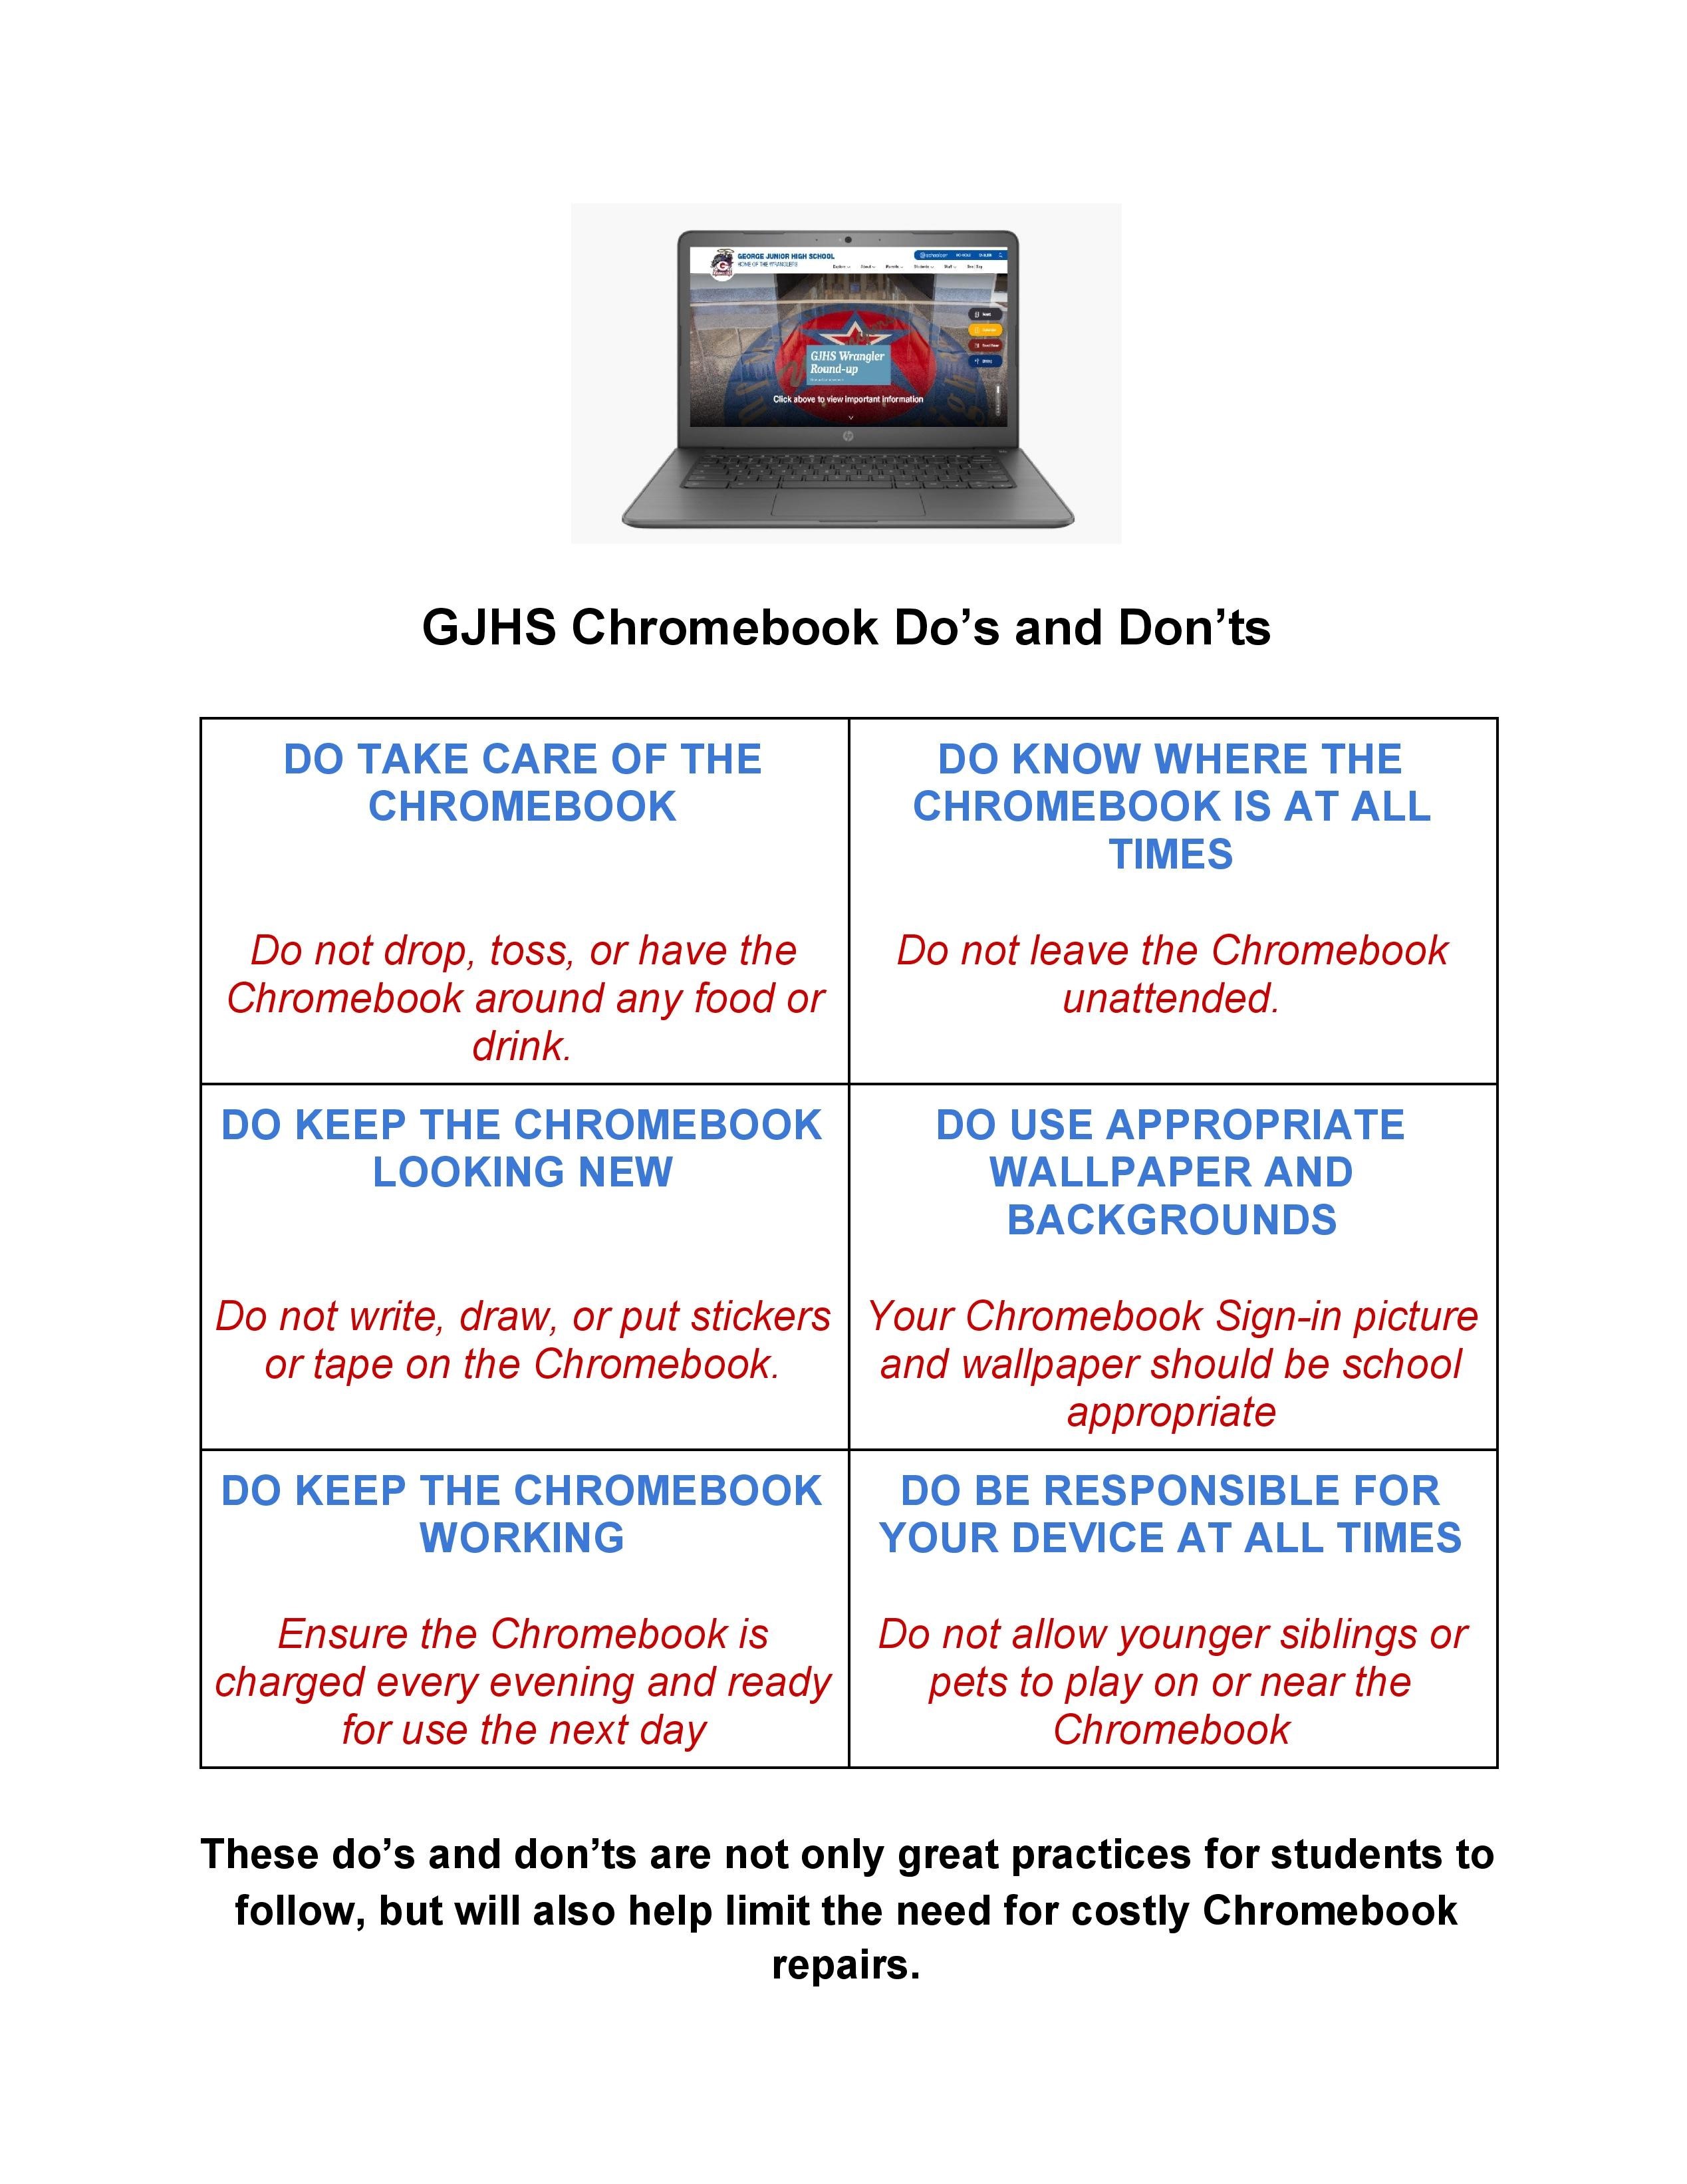 Chromebook Do's and Don'ts